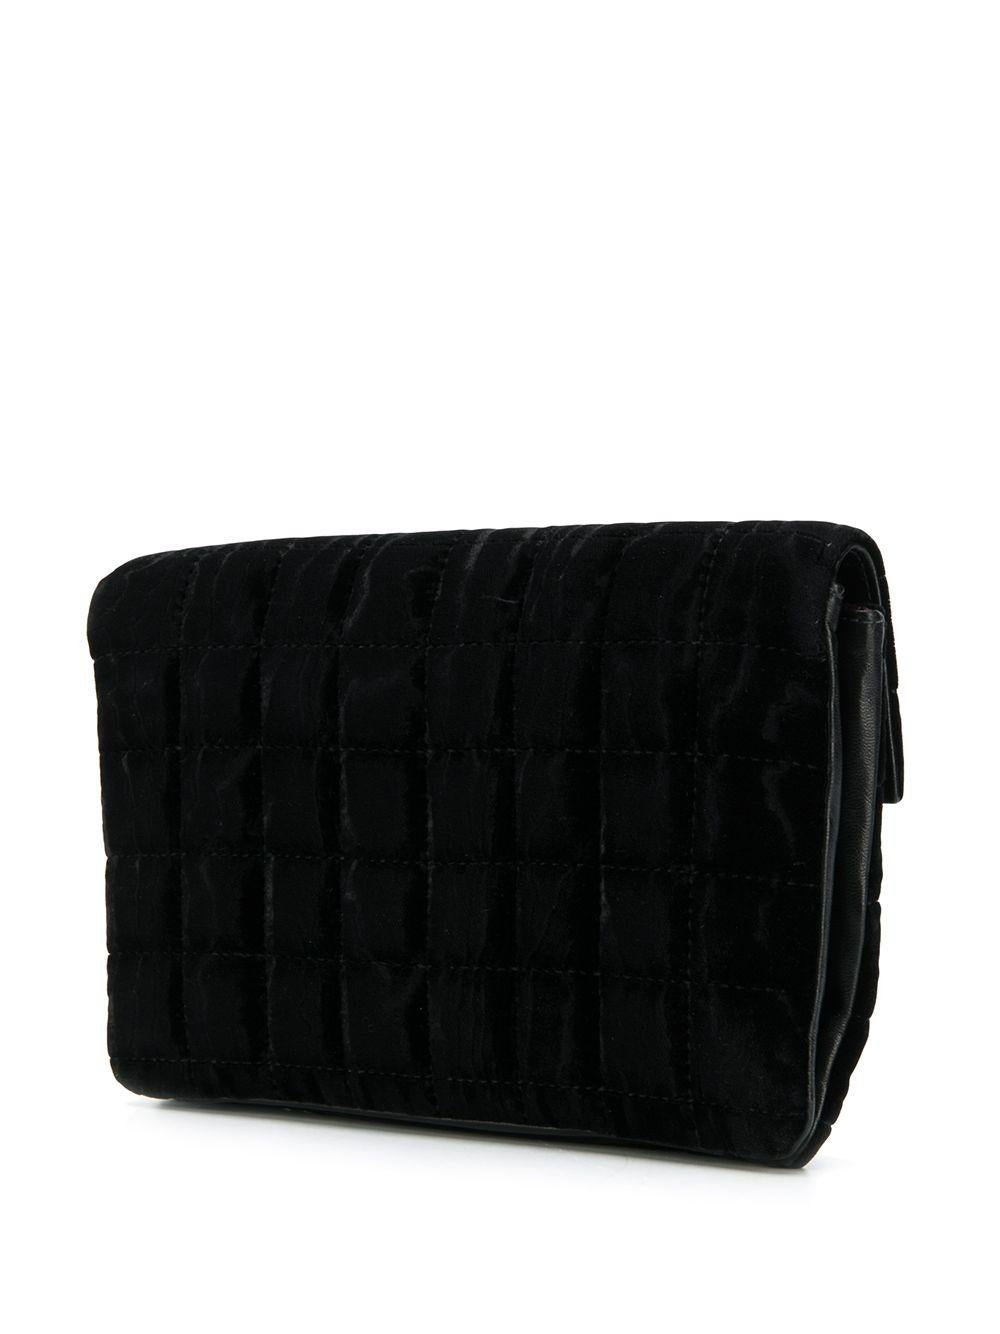 Crafted in France from an intricate blend of luxurious velvet and soft lambskin leather, this timeless pre-owned Chanel clutch bag showcased a square diamond quilted finish and a gunmetal-tone plaque which is embellished with multiple stones for a